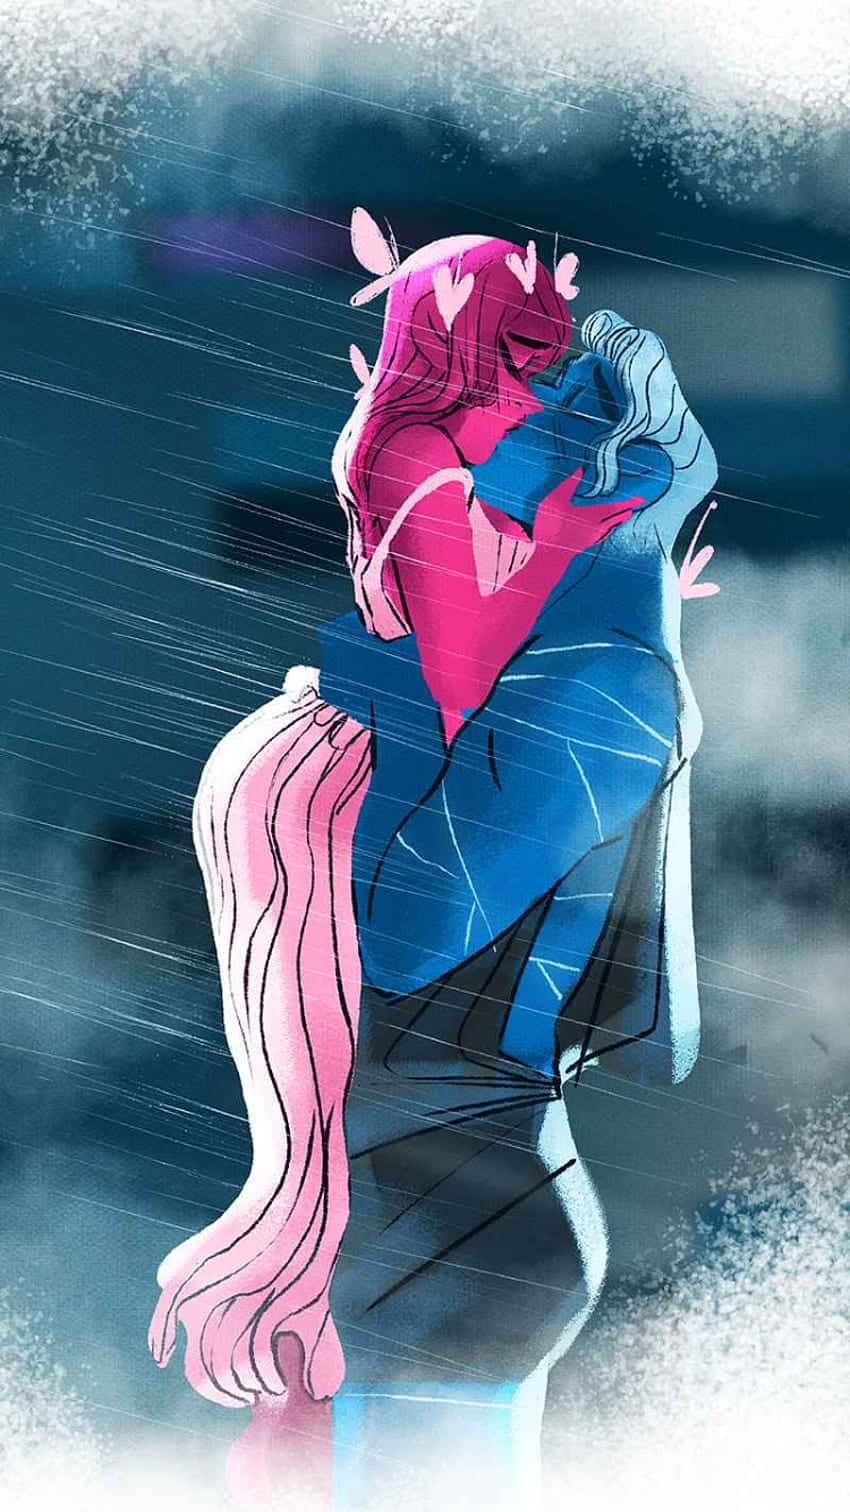 A Couple Of People Hugging In The Rain Wallpaper